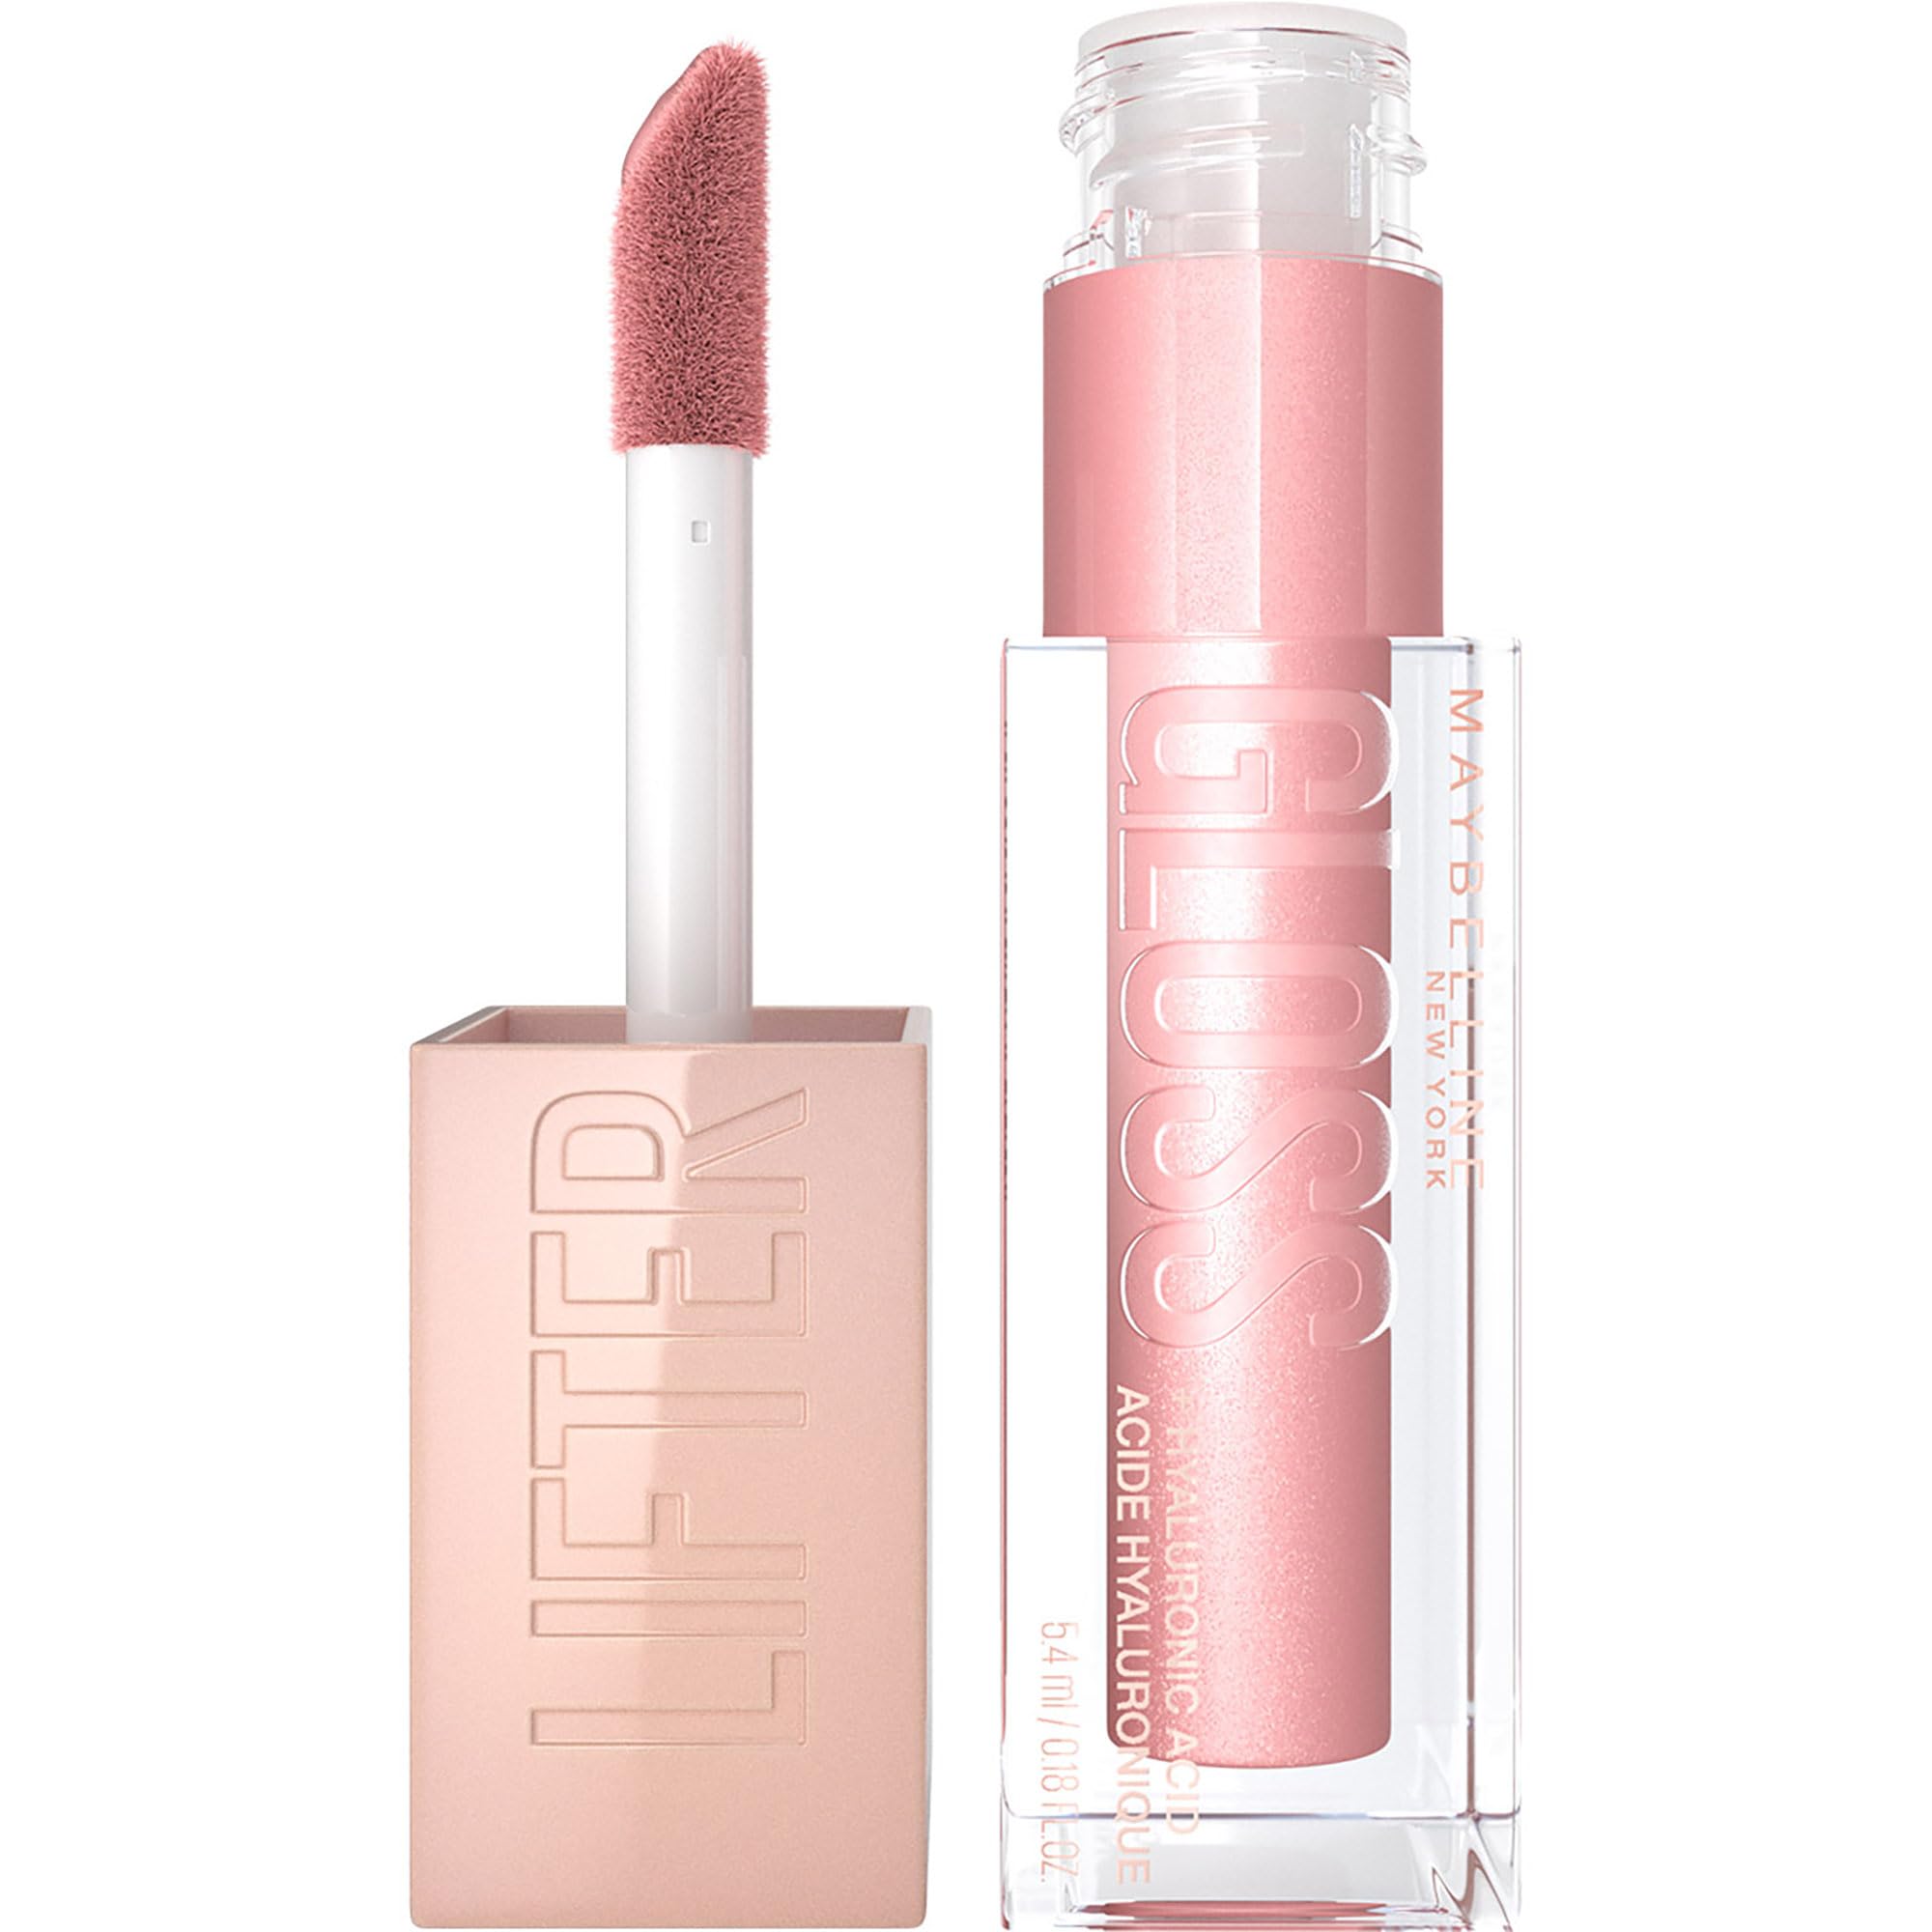 Maybelline New York Lifter Gloss, Hydrating Lip Gloss with Hyaluronic Acid, High Shine for Plumper Looking Lips, Opal, Pink Neutral, 0.18 Ounce